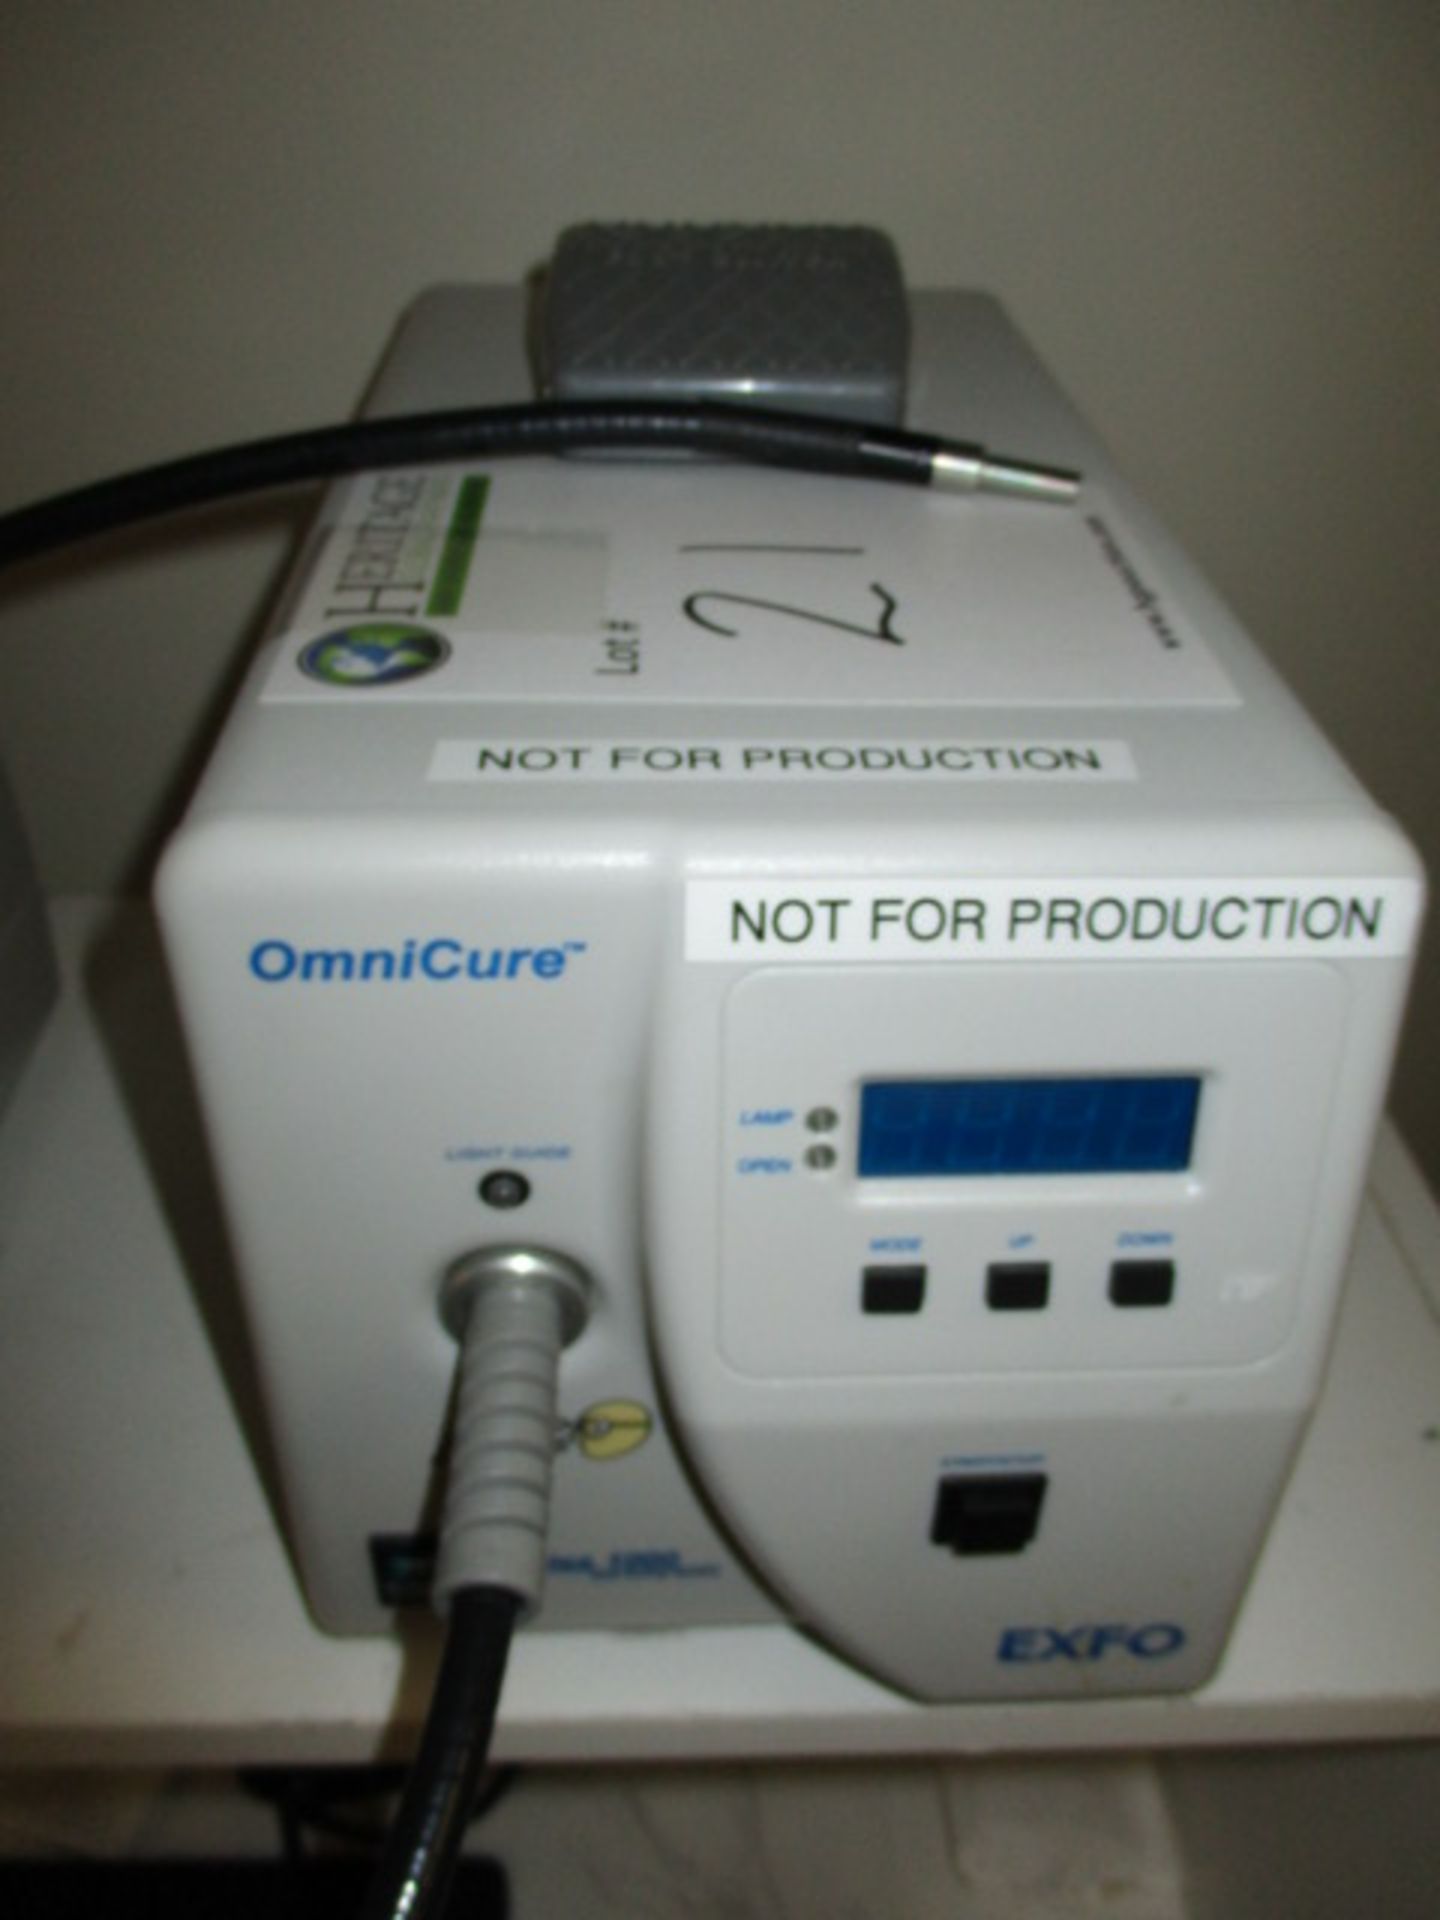 EXFO Series-1000/OmniCure Spot Curing System, With Foot Pedal. LOC: Area-4. Asset Located At Clarity